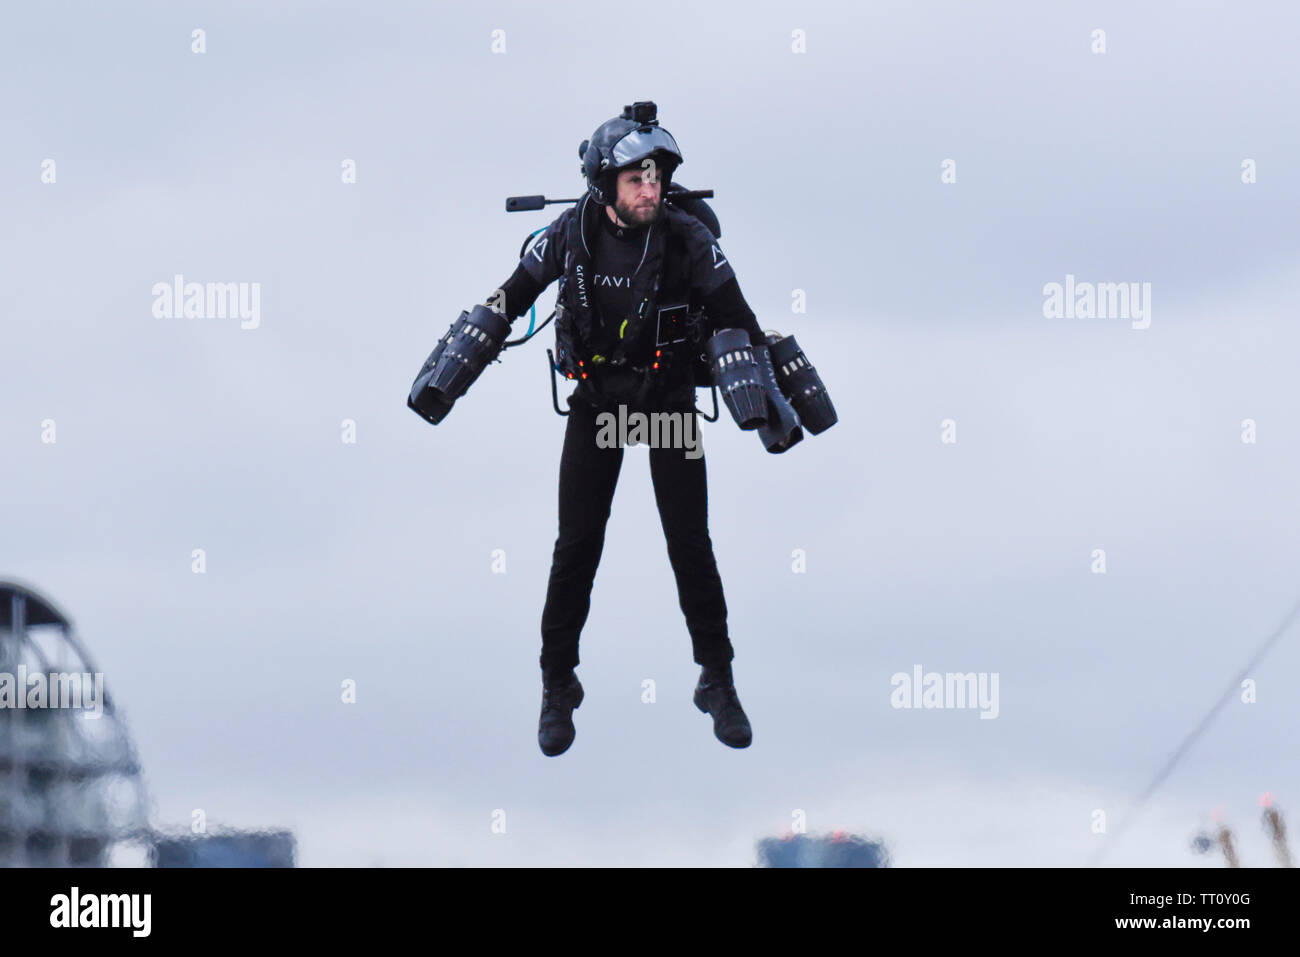 London, UK.  13 June 2019.  Richard Browning the Founder and Chief Test Pilot of Gravity Industries and ‘real life Iron Man’ in the air to preview their Race Series concept at Royal Victoria Docks, East London, during London Tech Week 2019, ahead of the launch of Gravity Industries’ International Race Series in early 2020.  Gravity Industries are the designers, builders and pilots of the world’s first patented Jet Suit, pioneering a new era of human flight. Credit: Stephen Chung / Alamy Live News Stock Photo